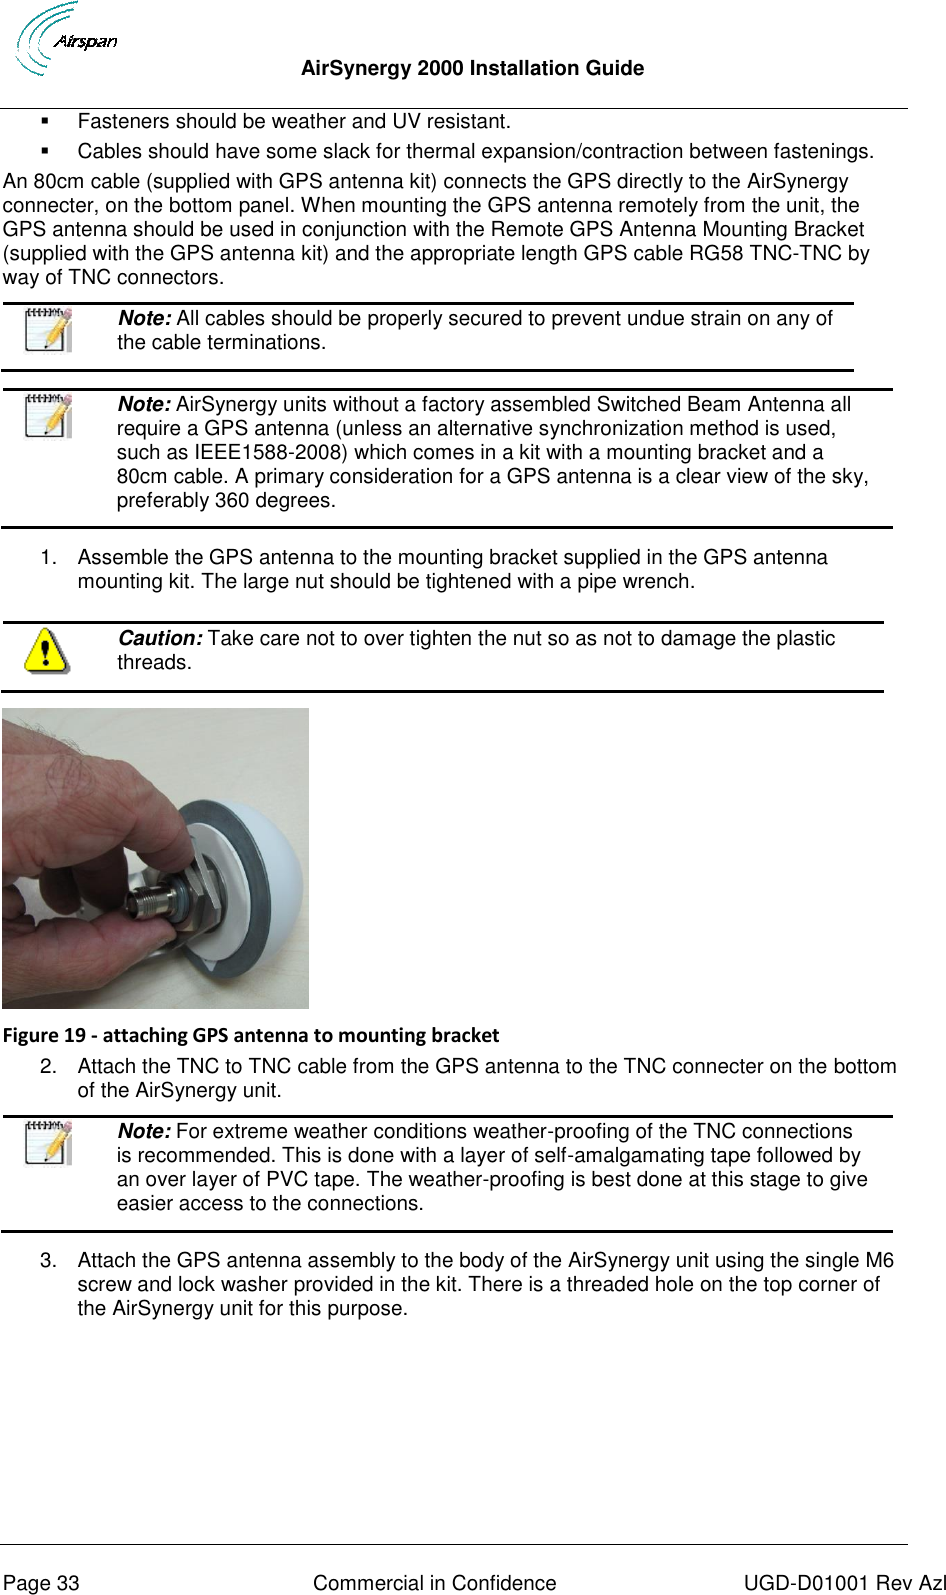  AirSynergy 2000 Installation Guide     Page 33  Commercial in Confidence  UGD-D01001 Rev Azl   Fasteners should be weather and UV resistant.   Cables should have some slack for thermal expansion/contraction between fastenings. An 80cm cable (supplied with GPS antenna kit) connects the GPS directly to the AirSynergy connecter, on the bottom panel. When mounting the GPS antenna remotely from the unit, the GPS antenna should be used in conjunction with the Remote GPS Antenna Mounting Bracket (supplied with the GPS antenna kit) and the appropriate length GPS cable RG58 TNC-TNC by way of TNC connectors.  Note: All cables should be properly secured to prevent undue strain on any of the cable terminations.     Note: AirSynergy units without a factory assembled Switched Beam Antenna all require a GPS antenna (unless an alternative synchronization method is used, such as IEEE1588-2008) which comes in a kit with a mounting bracket and a 80cm cable. A primary consideration for a GPS antenna is a clear view of the sky, preferably 360 degrees.  1.  Assemble the GPS antenna to the mounting bracket supplied in the GPS antenna mounting kit. The large nut should be tightened with a pipe wrench.   Caution: Take care not to over tighten the nut so as not to damage the plastic threads.    Figure 19 - attaching GPS antenna to mounting bracket 2.  Attach the TNC to TNC cable from the GPS antenna to the TNC connecter on the bottom of the AirSynergy unit.   Note: For extreme weather conditions weather-proofing of the TNC connections is recommended. This is done with a layer of self-amalgamating tape followed by an over layer of PVC tape. The weather-proofing is best done at this stage to give easier access to the connections.  3.  Attach the GPS antenna assembly to the body of the AirSynergy unit using the single M6 screw and lock washer provided in the kit. There is a threaded hole on the top corner of the AirSynergy unit for this purpose. 